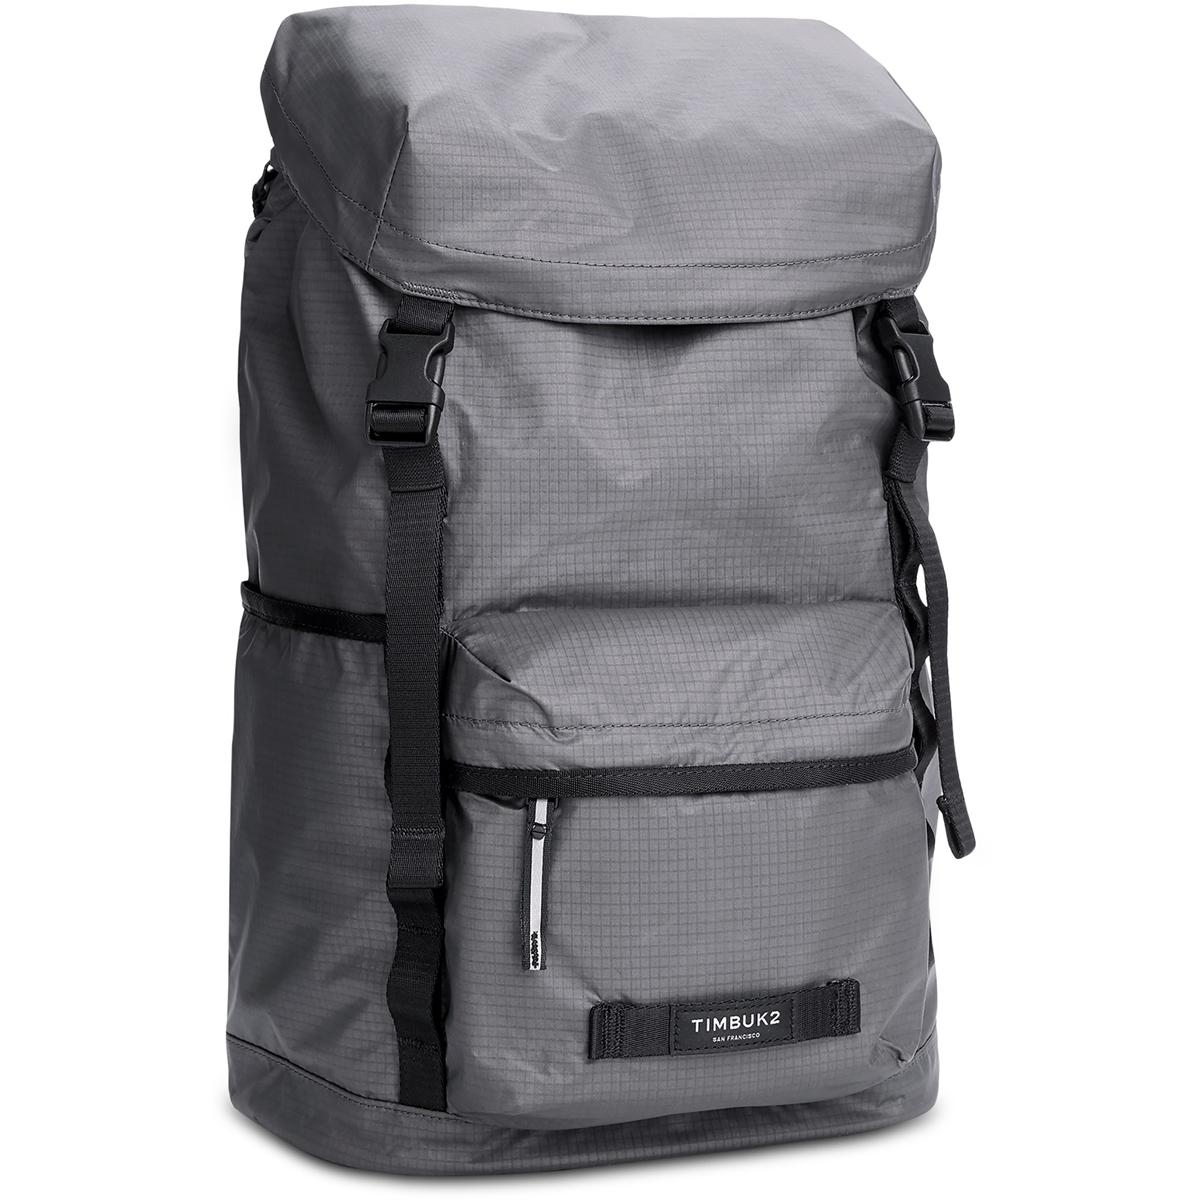 Timbuk2 Launch Pack Backpack for $37.73